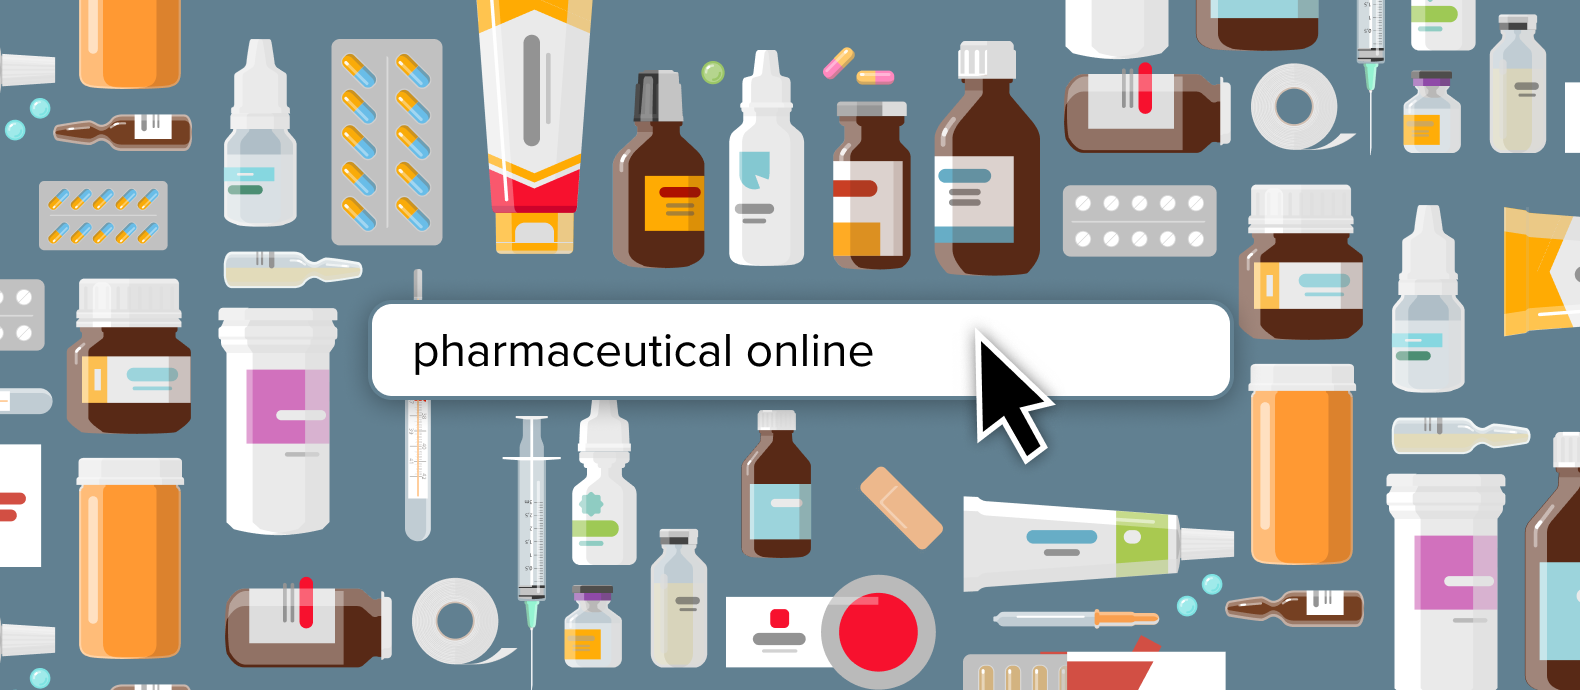 A Bitter Pill to Swallow: Fighting the Fake Pharmaceuticals Online